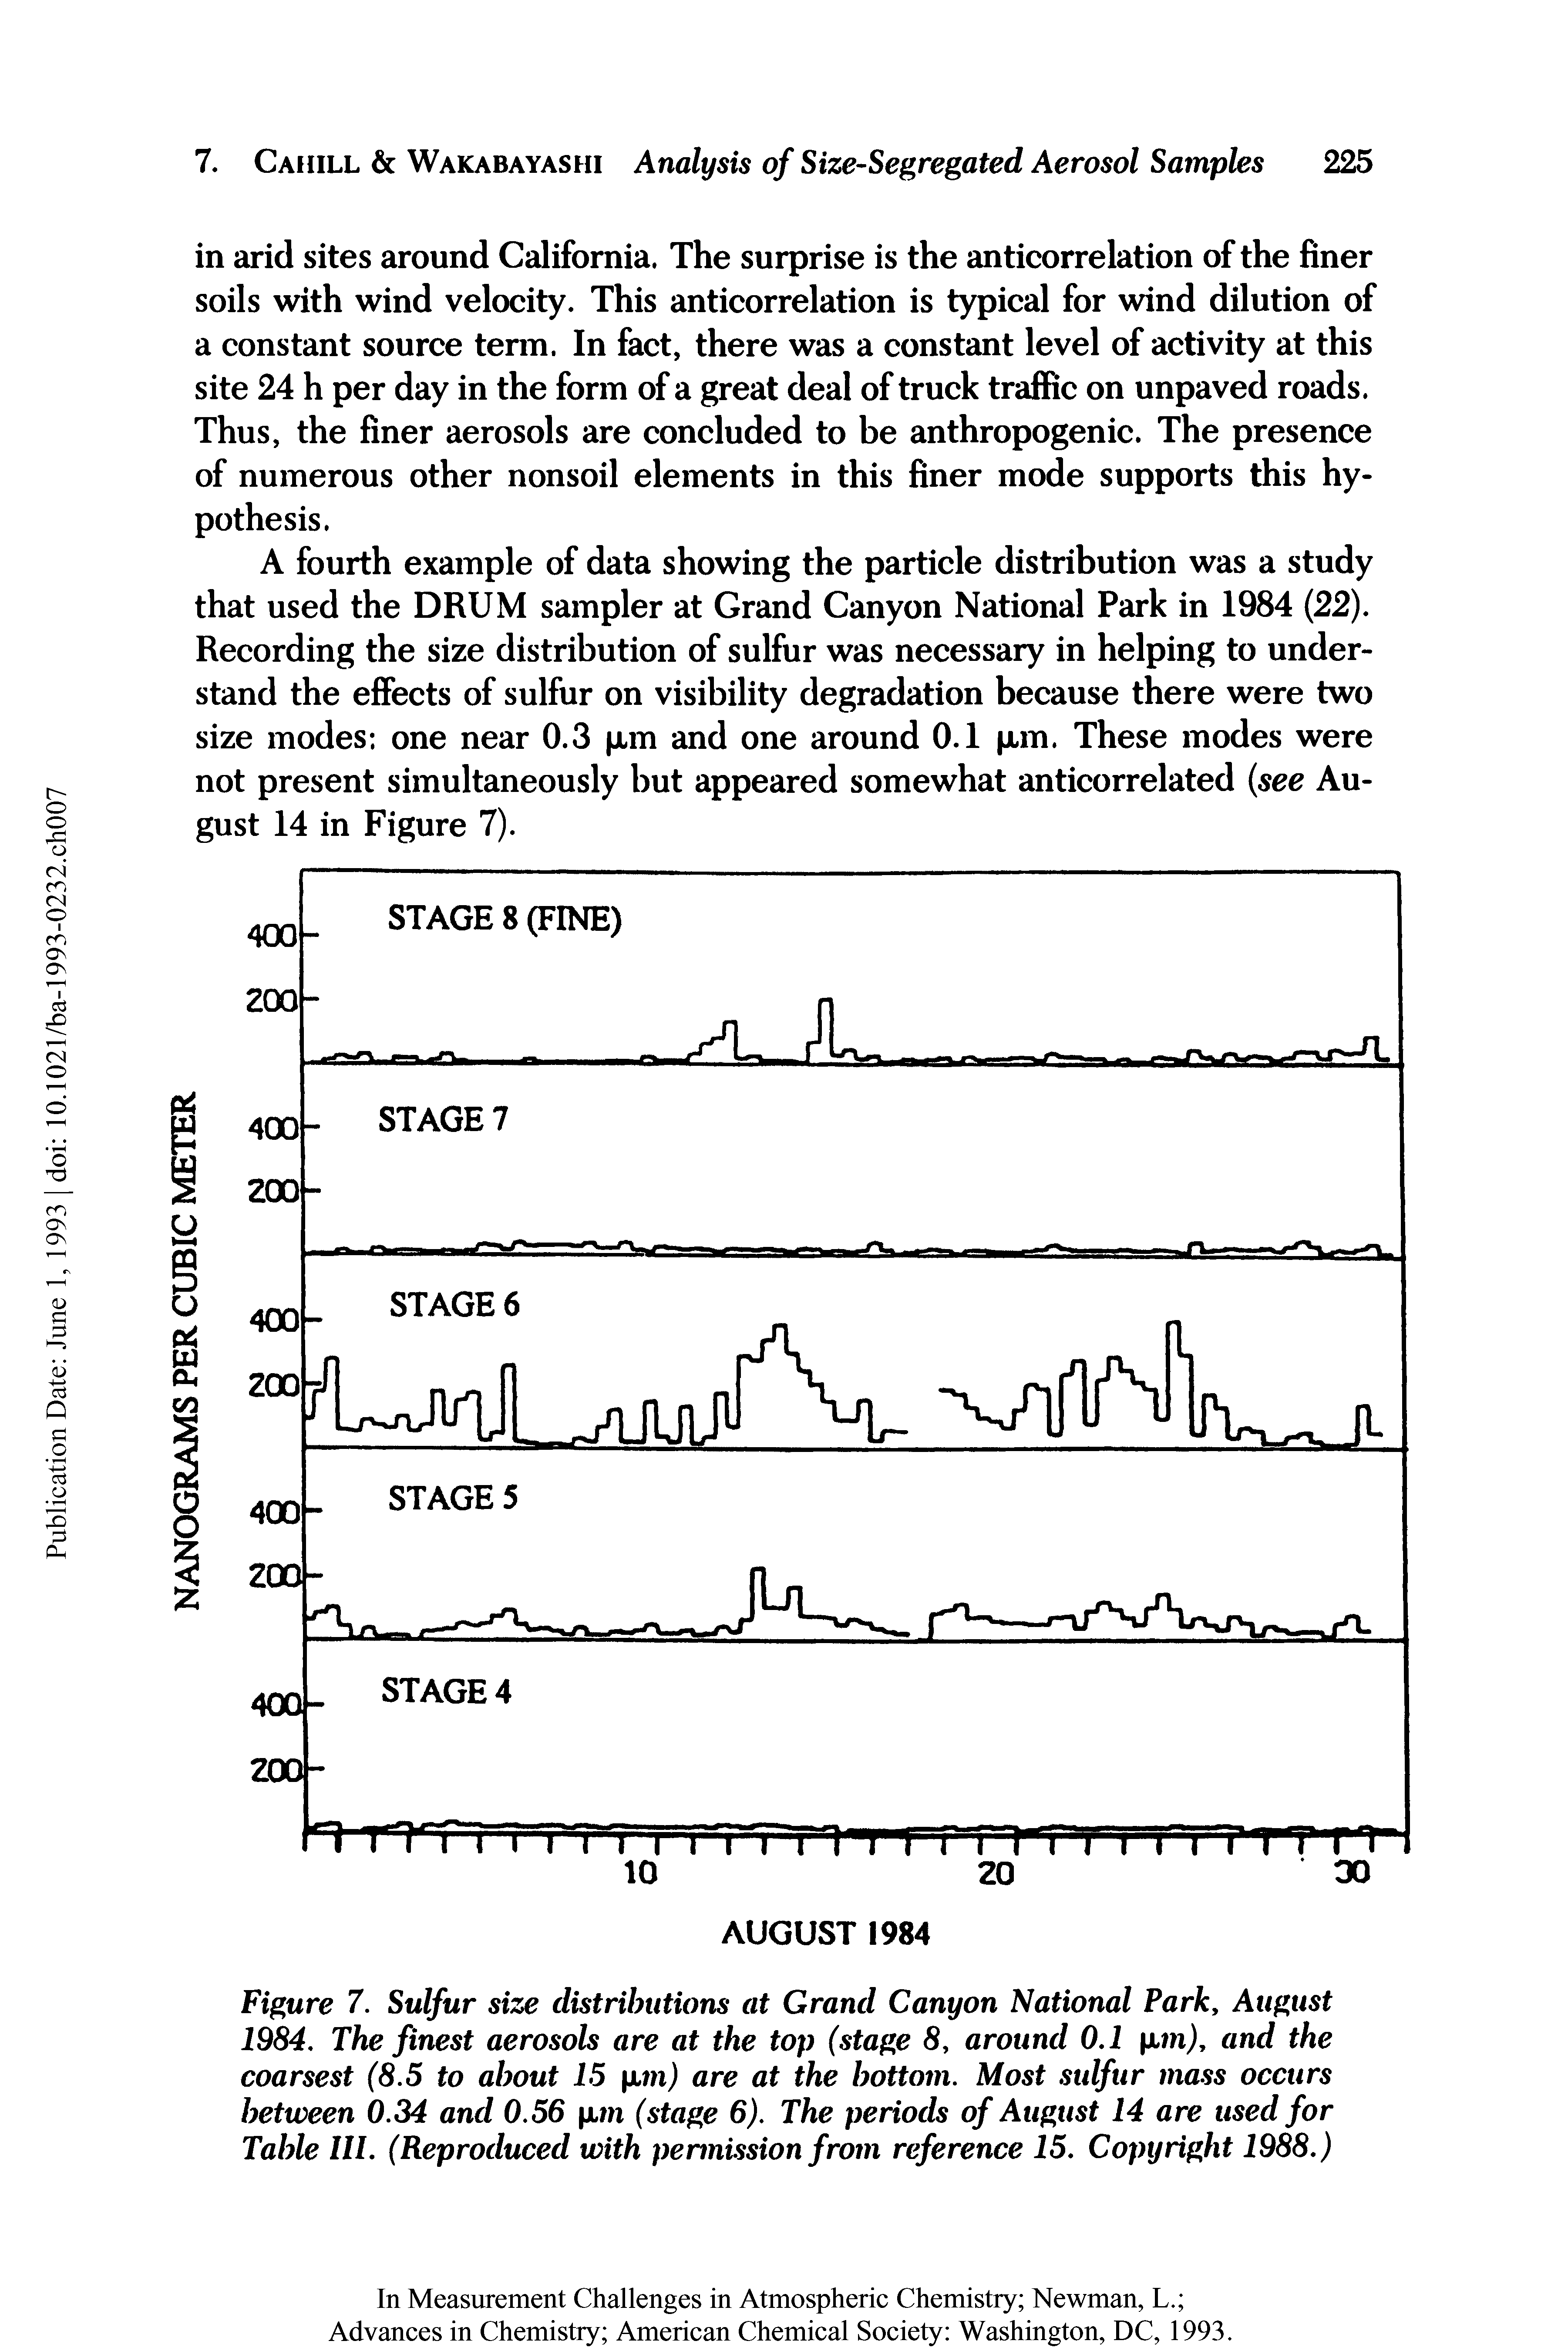 Figure 7. Sulfur size distributions at Grand Canyon National Parky August 1984, The finest aerosols are at the top (stage 8, around 0.1 xm), and the coarsest (8.5 to about 15 xm) are at the bottom. Most sulfur mass occurs between 0.34 and 0.56 xm (stage 6). The periods of August 14 are used for Table 111. (Reproduced with permission from reference 15. Copyright 1988.)...